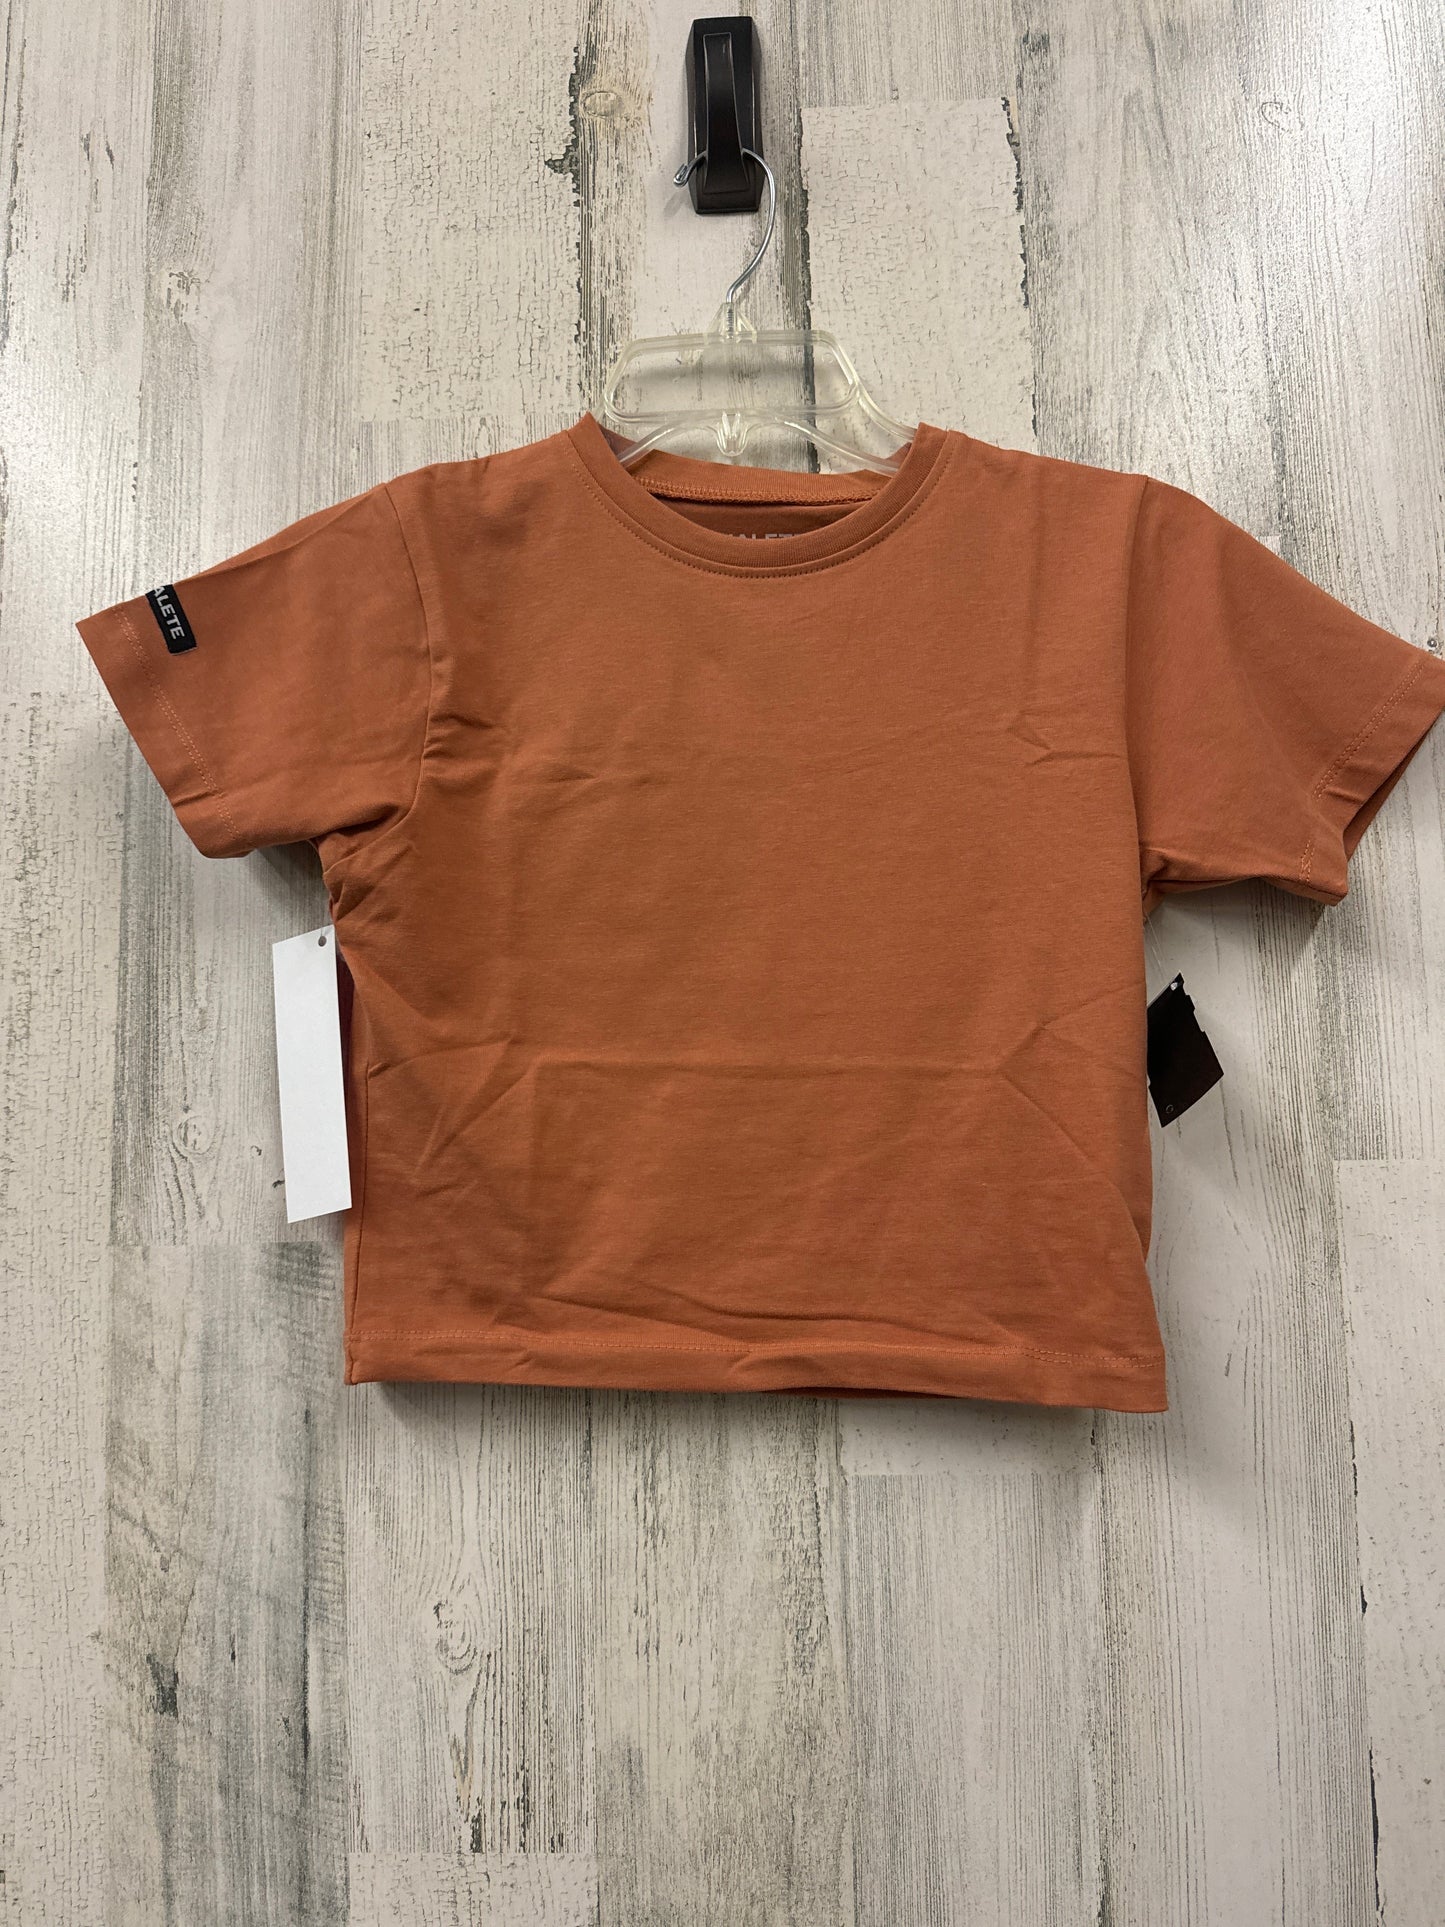 Orange Athletic Top Short Sleeve Clothes Mentor, Size Xs